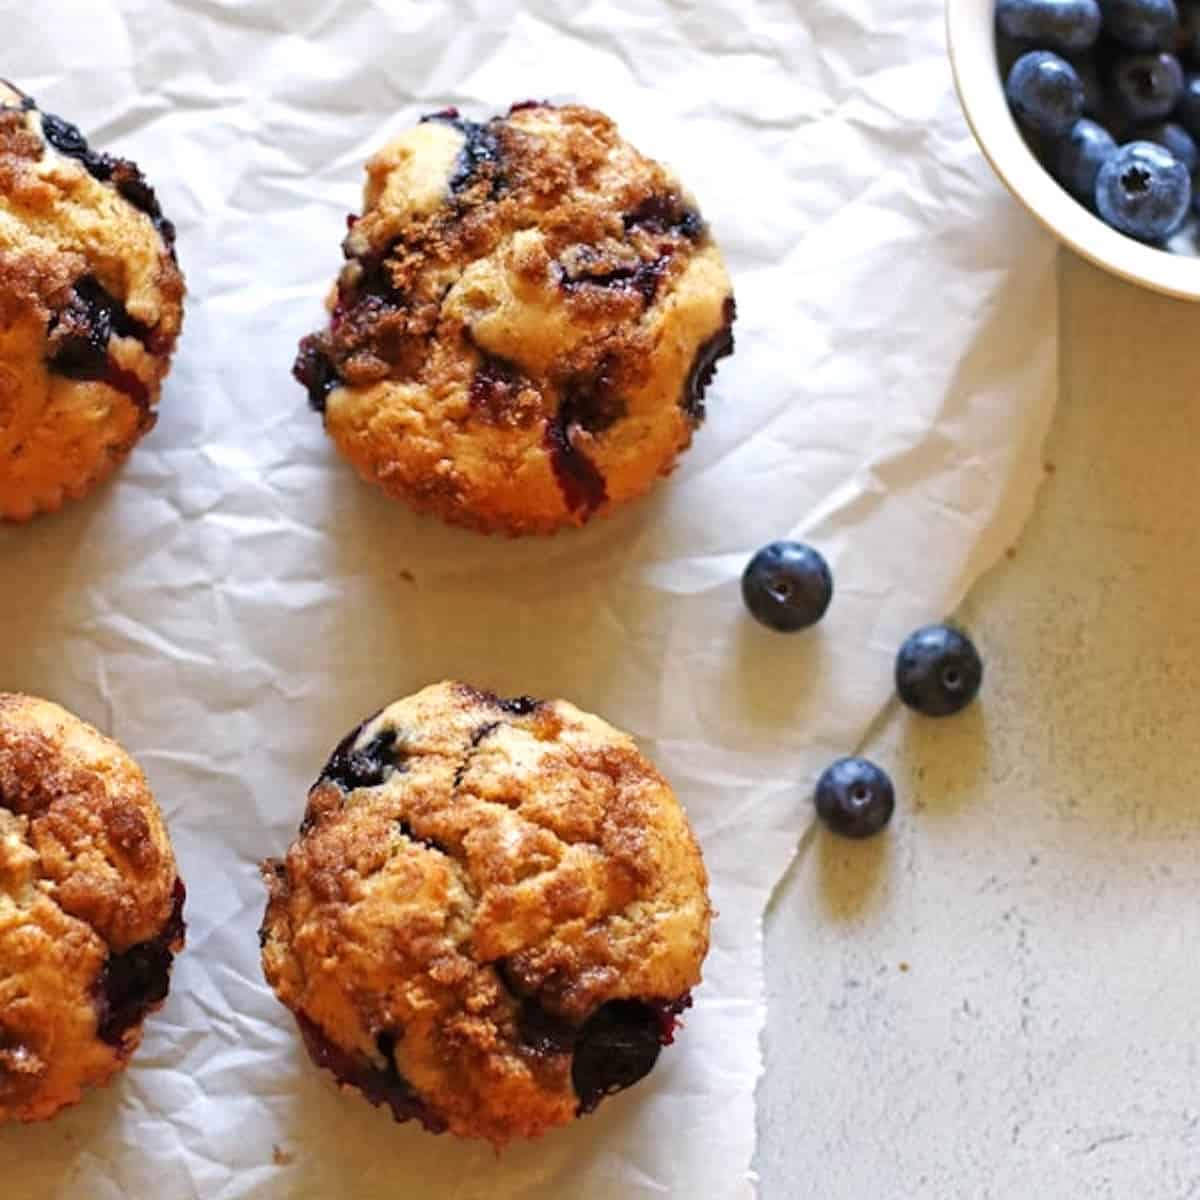 Blueberry Banana Muffins on white parchment paper with a small bowl of blueberries next to them.